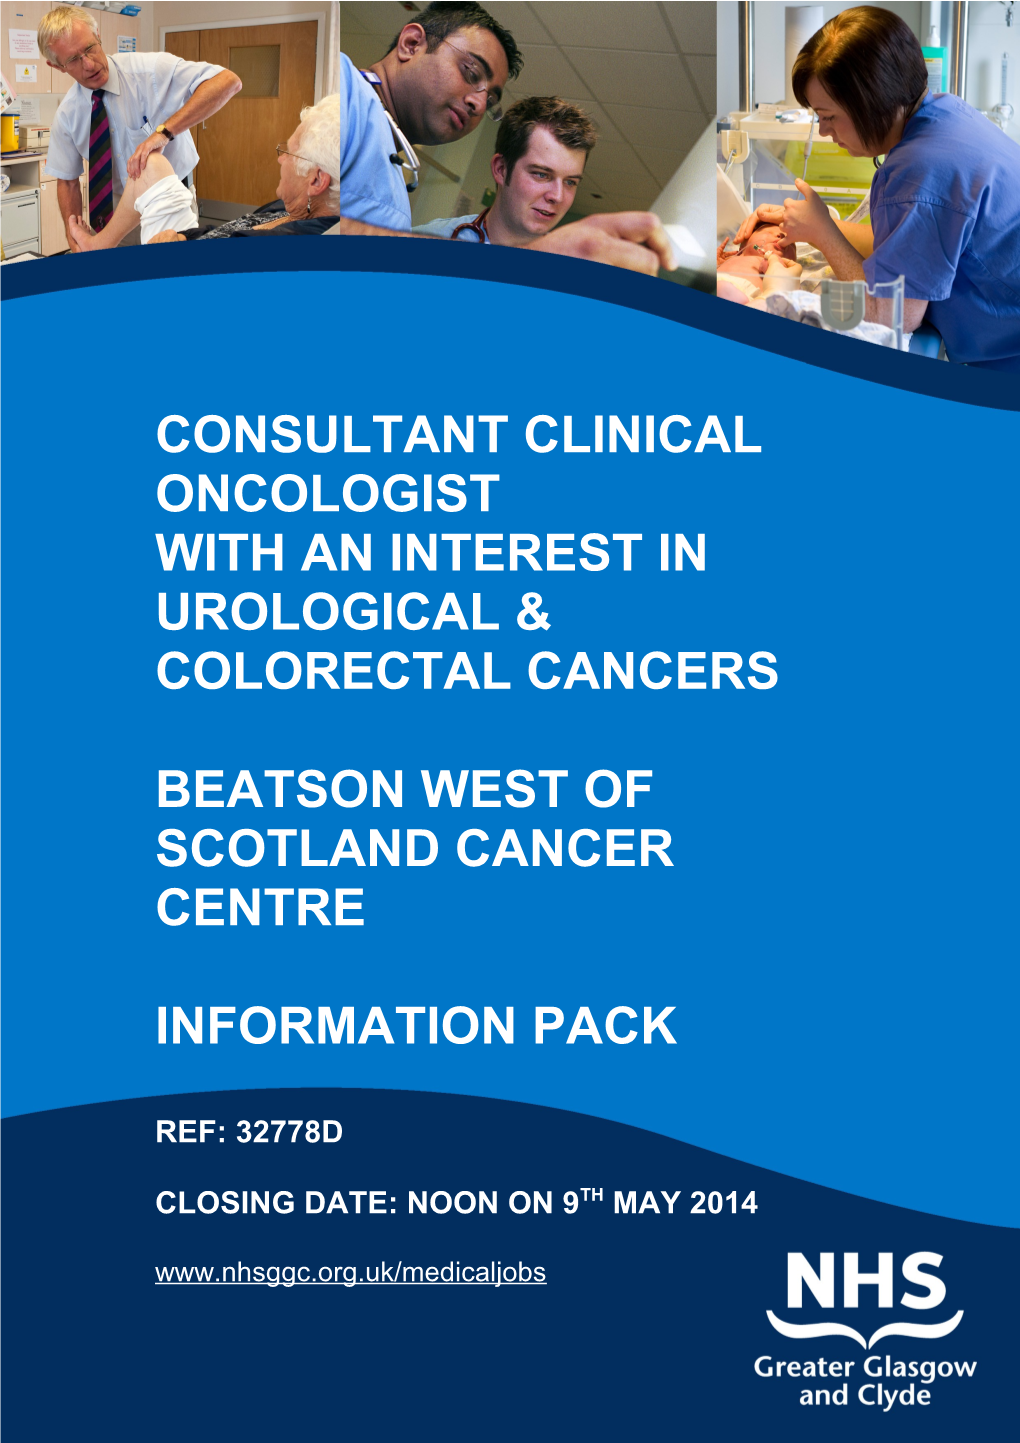 With an Interest in Urological & Colorectal Cancers